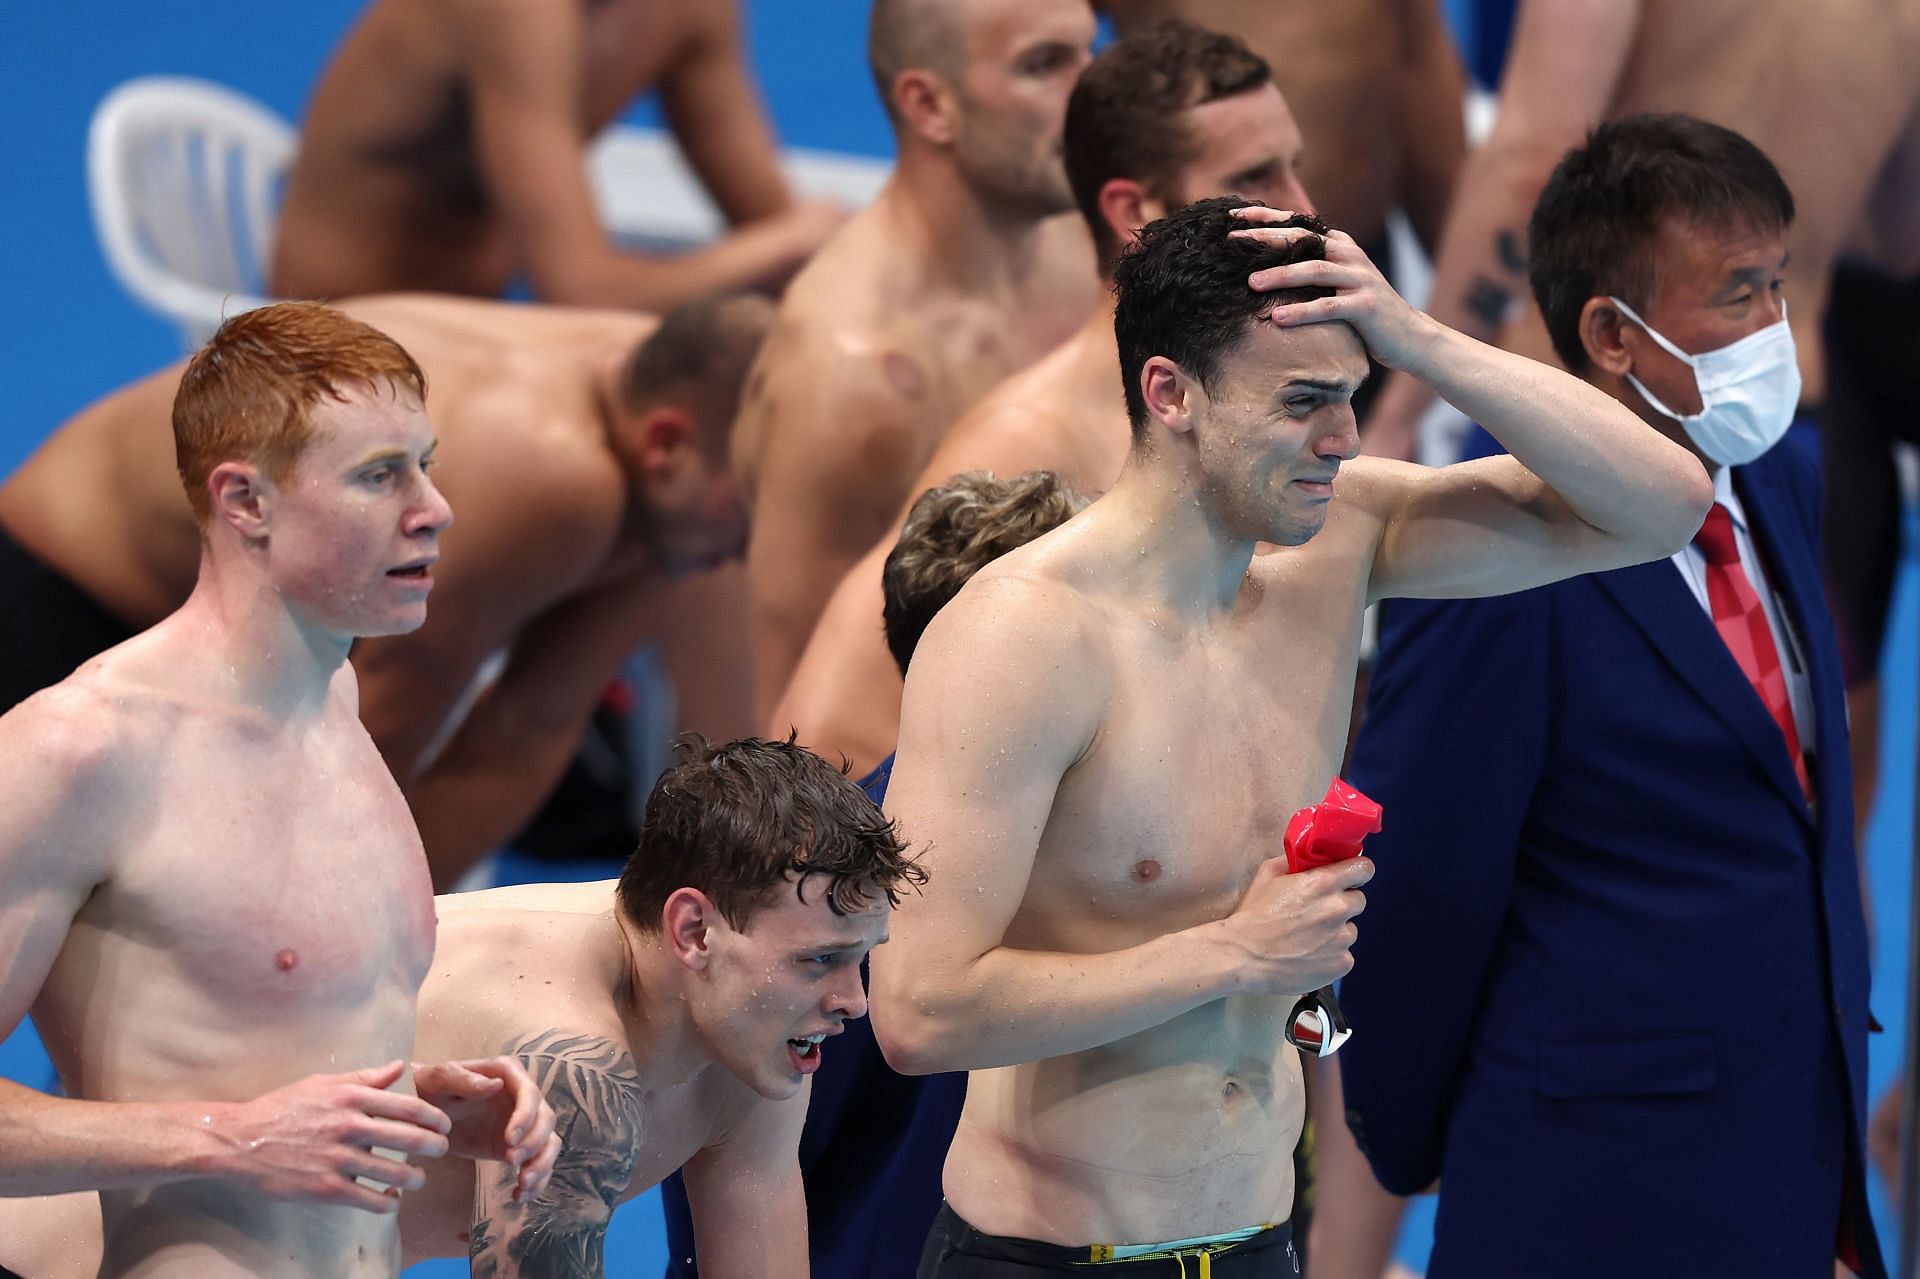 Swimming at 2023 World Aquatics Championships wont have live coverage in UK as negotiations fail following financial disagreement